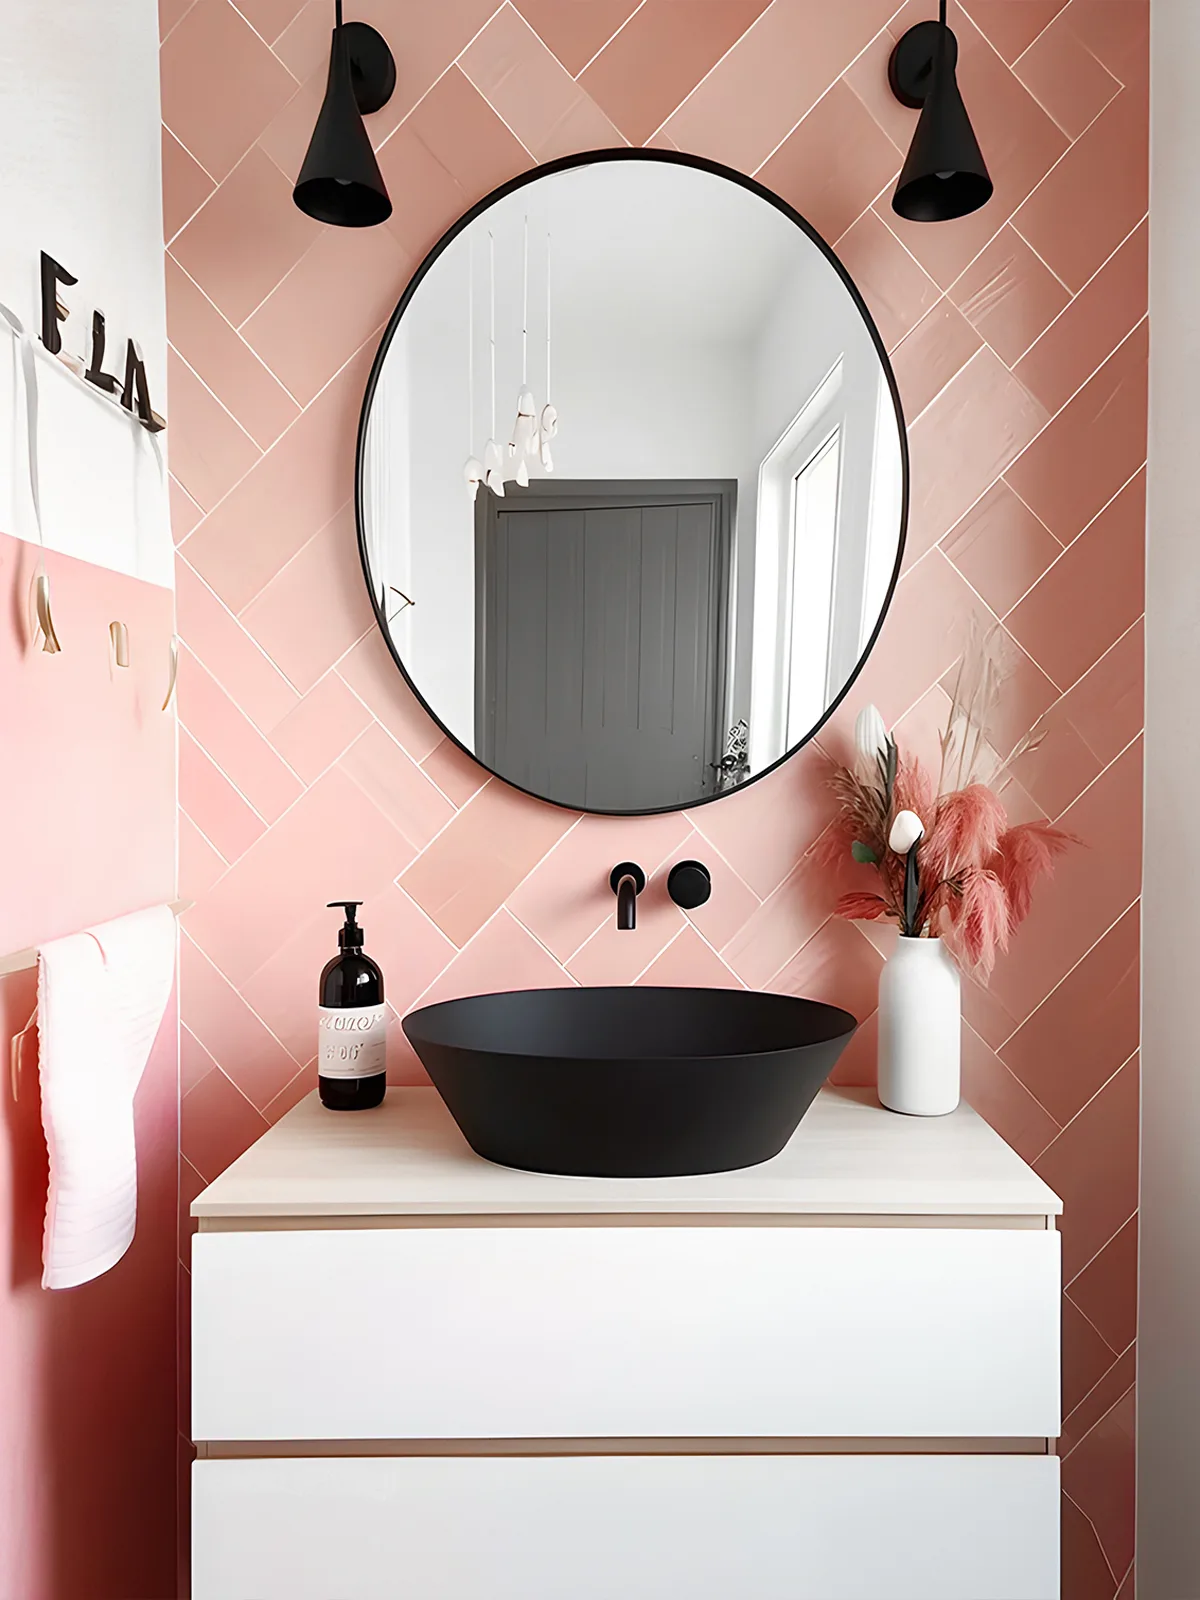 A pink and white bathroom with a black sink and mirror.